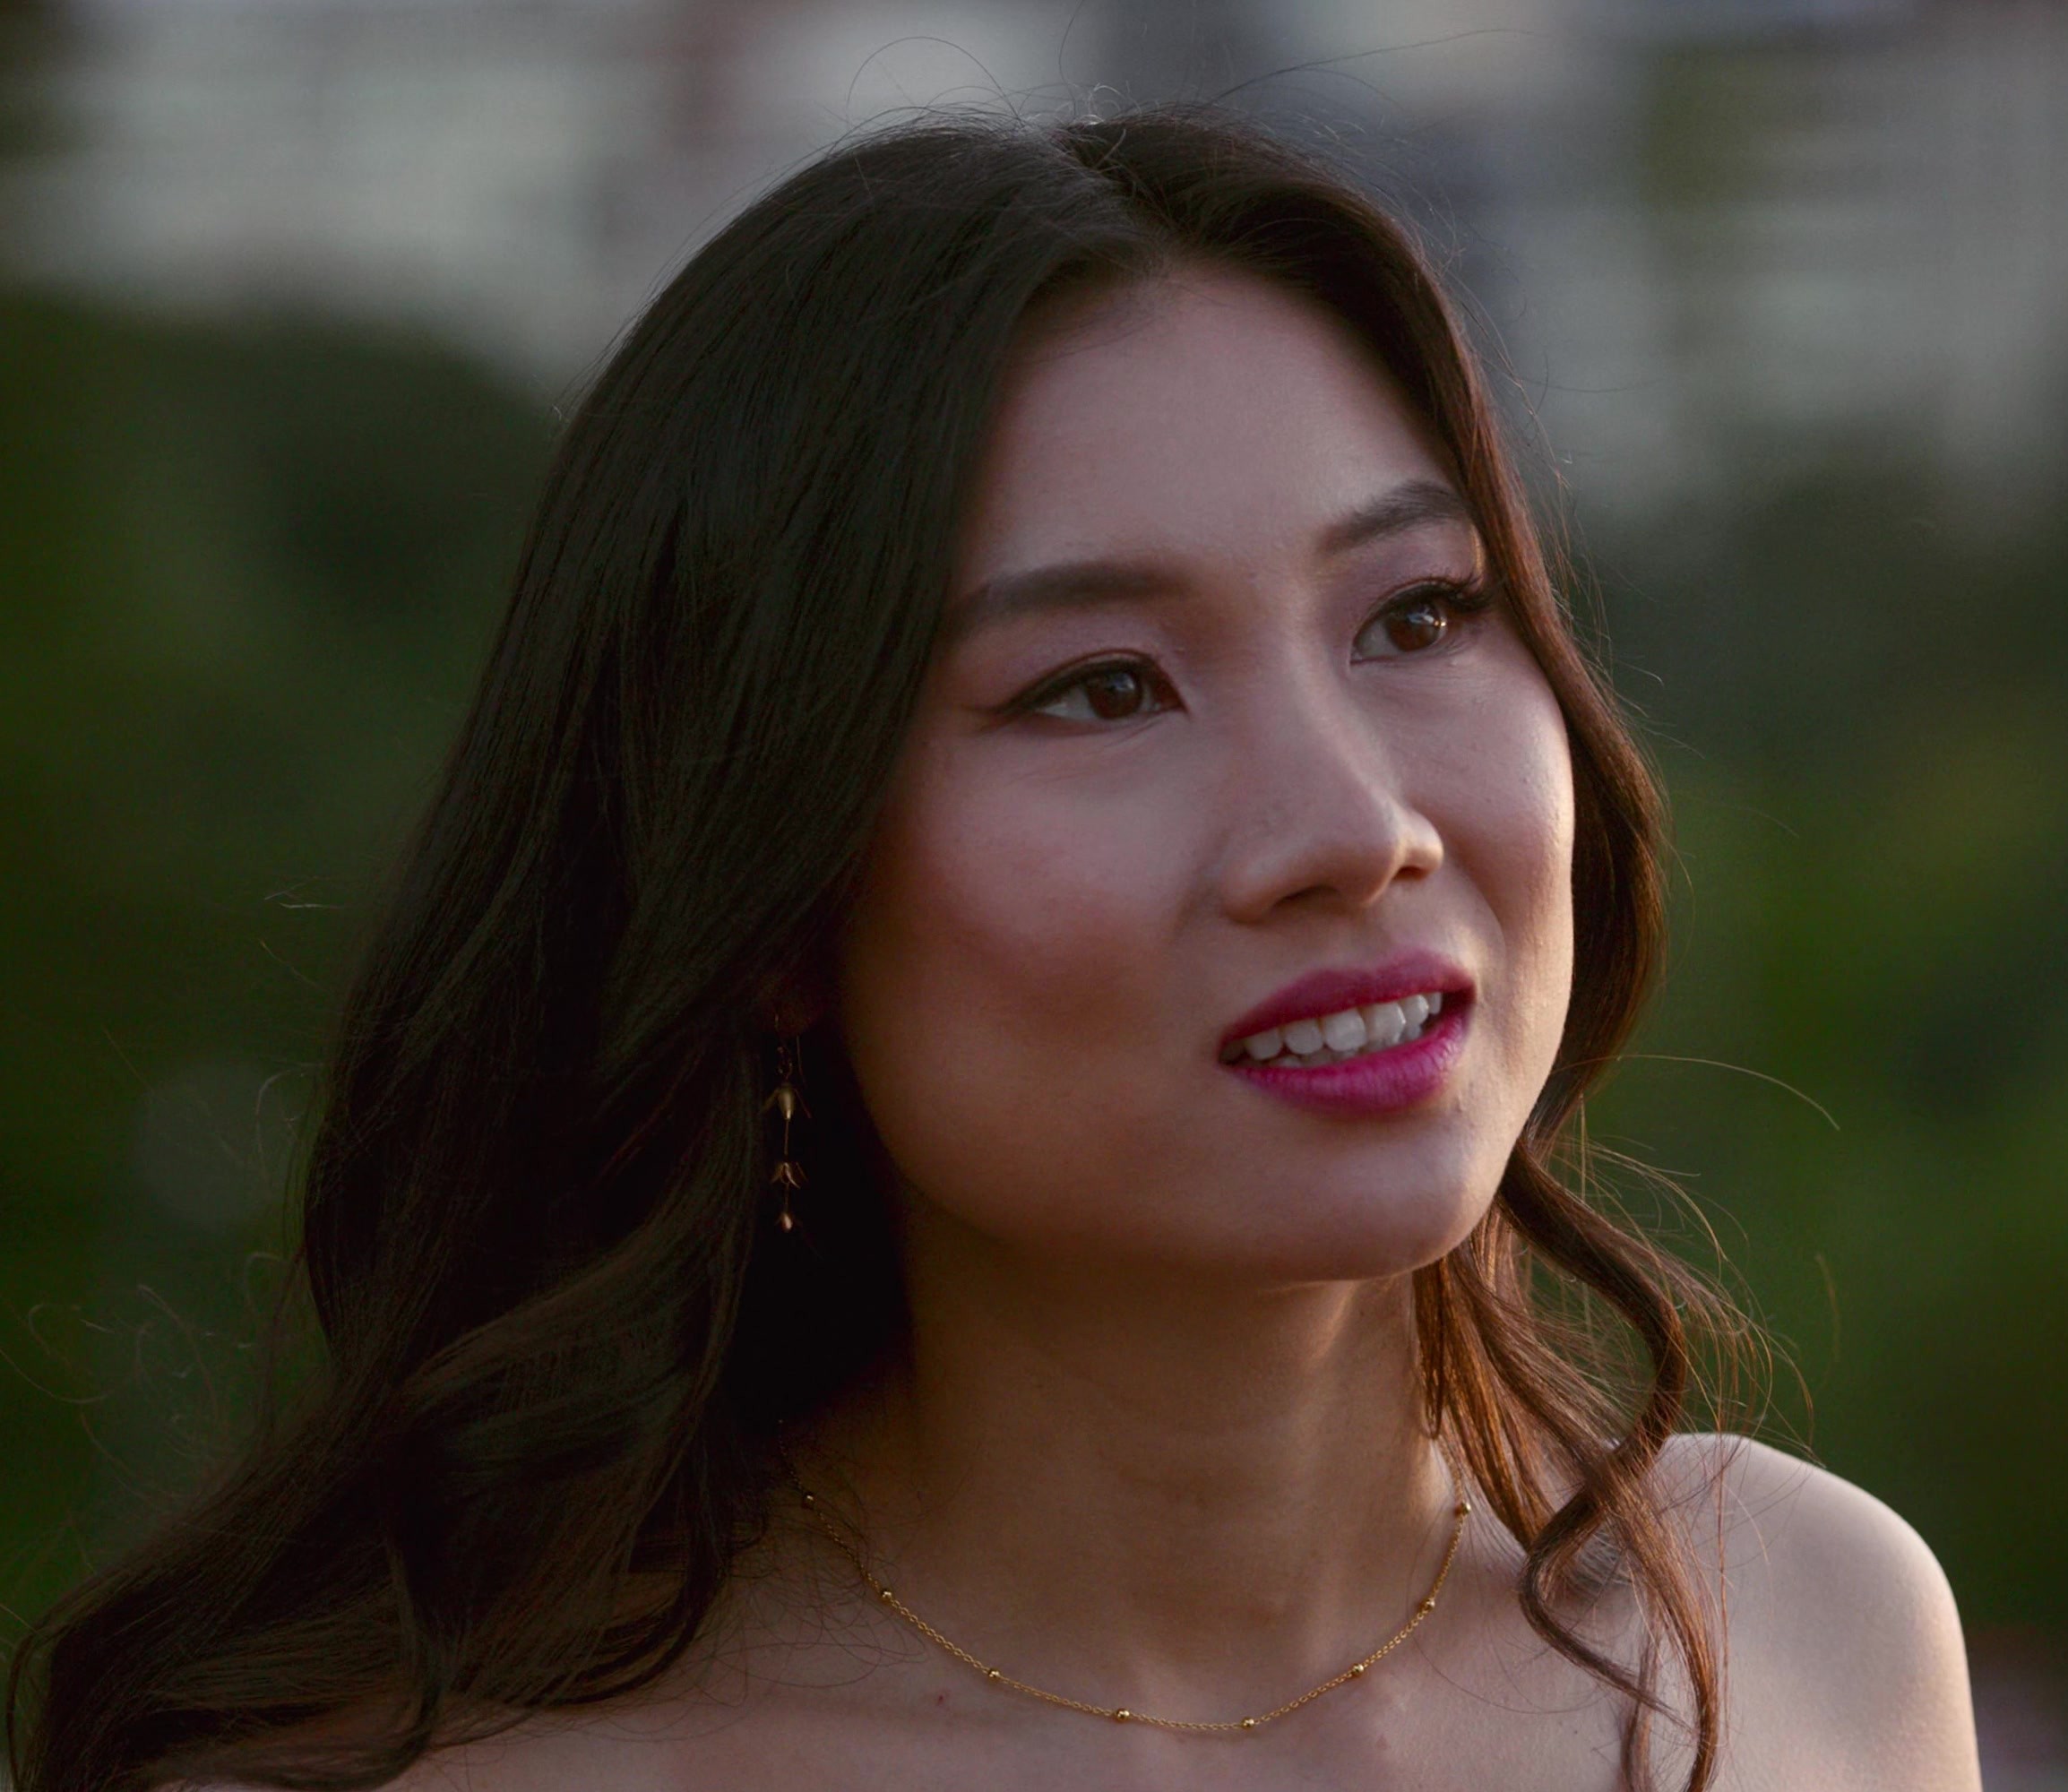 Worn on Five Blind Dates (2024) Movie - Delicate Gold Chain Necklace with Minimalist Design Worn by Shuang Hu as Lia